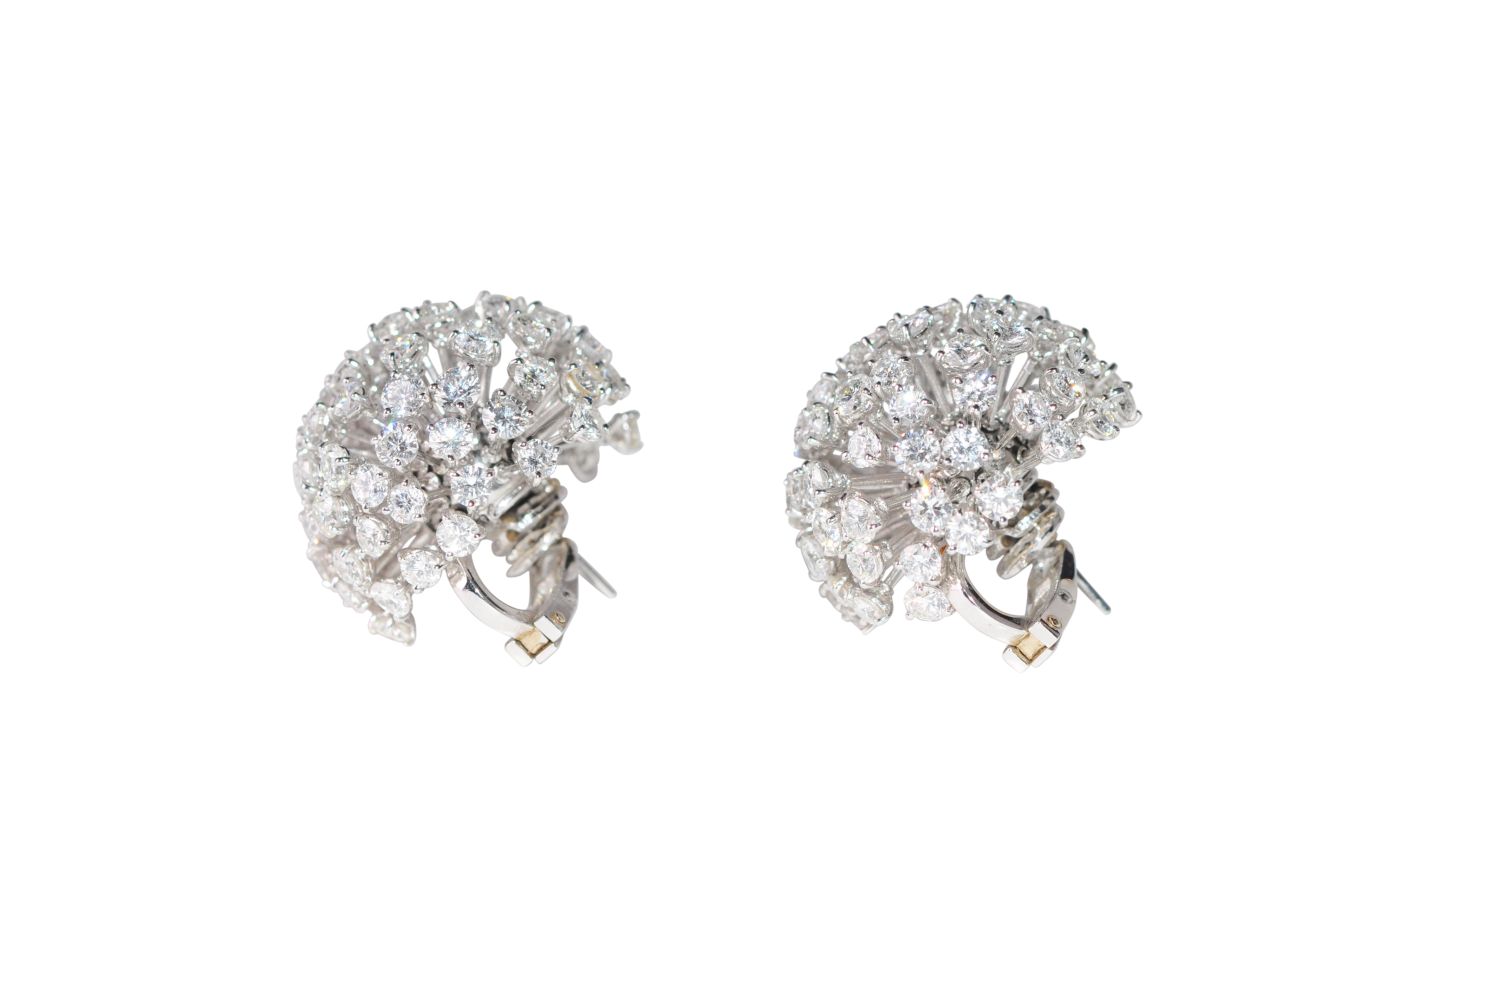 Brilliant ear clips18Kt white gold Ear clips with diamonds approx. 8ct, Total weight 26. - Image 3 of 3